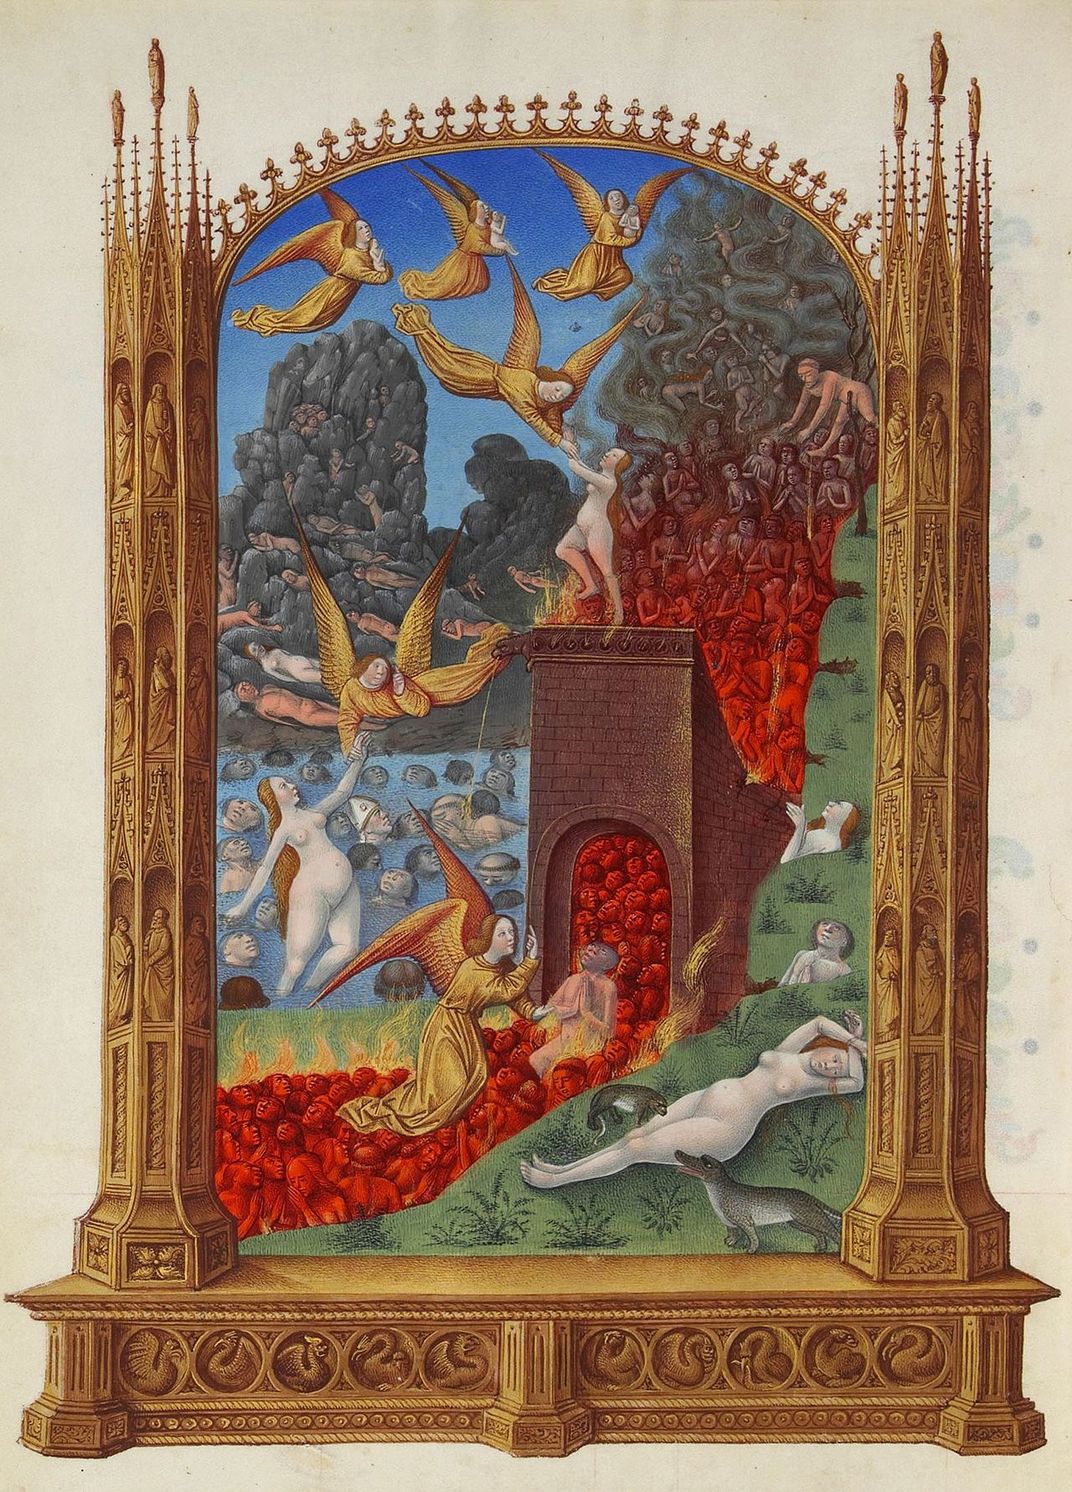 Depiction of a fiery purgatory in the Duke of Berry's 15th-century Book of Hours